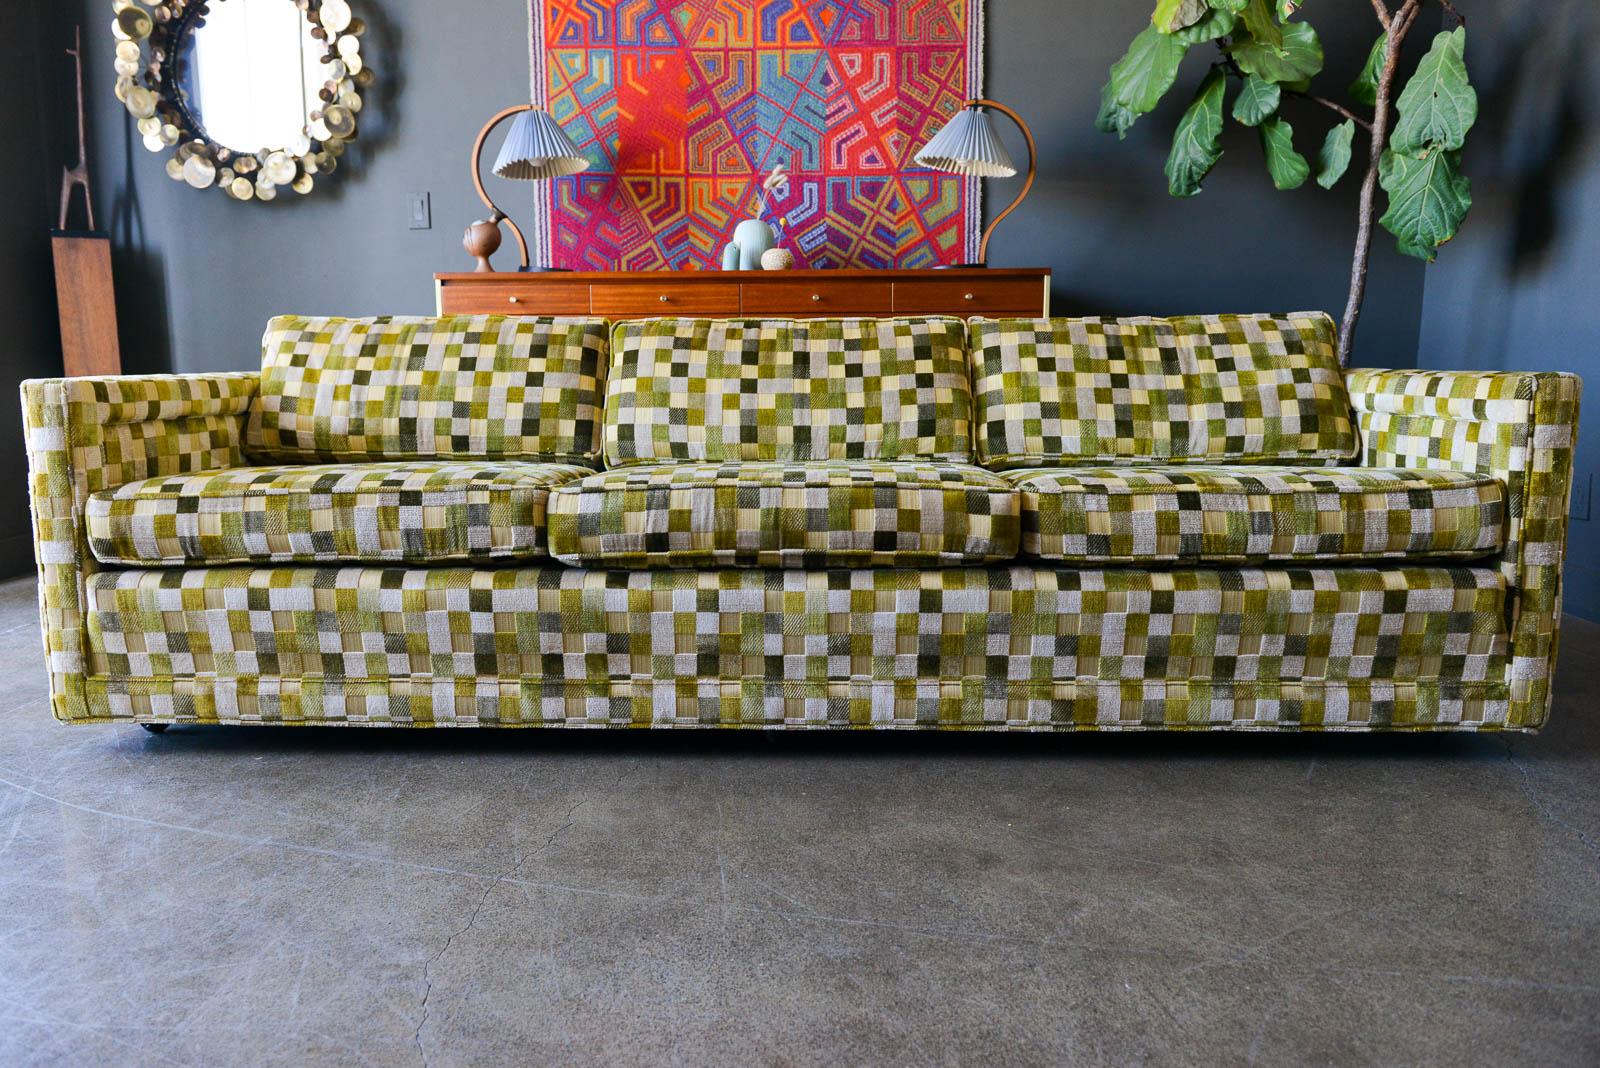 W&J Sloane Mid-Century Modern Sofa with Jack Lenor Larsen Velvet, ca. 1970. Gorgeous clean lines and original Jack Lenor Larsen chartreuse checkerboard velvet. Excellent original condition, professionally cleaned. Sofa has three rolling casters on